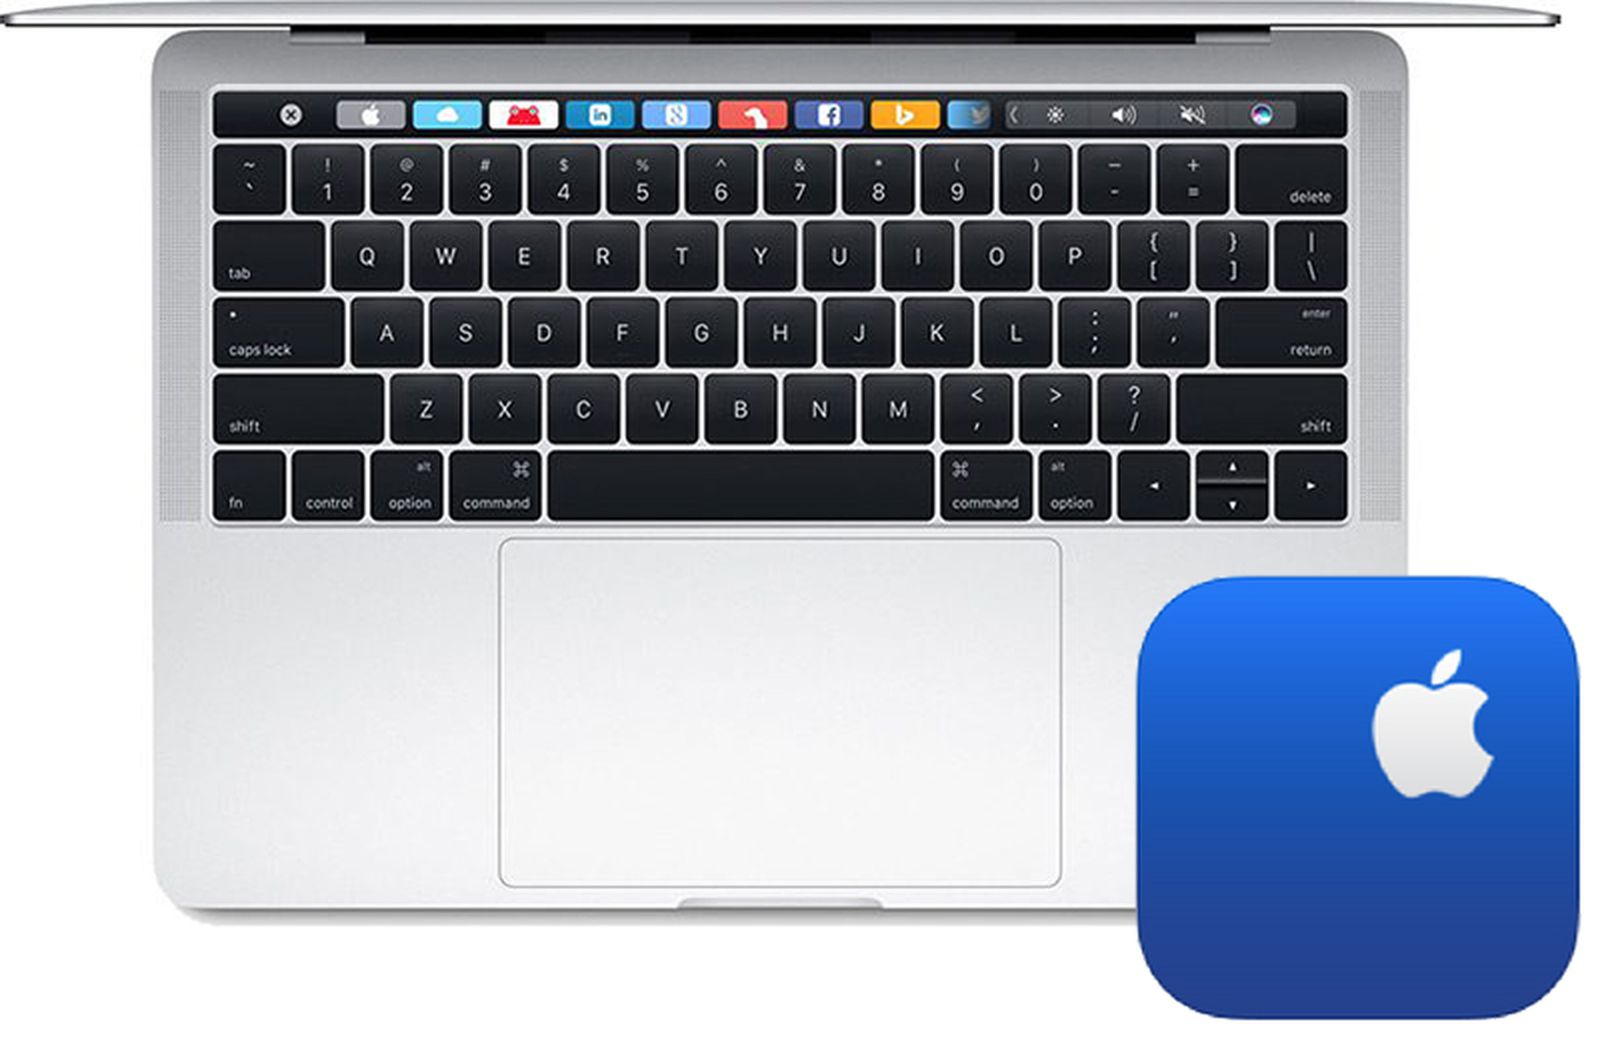 macbook air keyboard replacement cost apple store